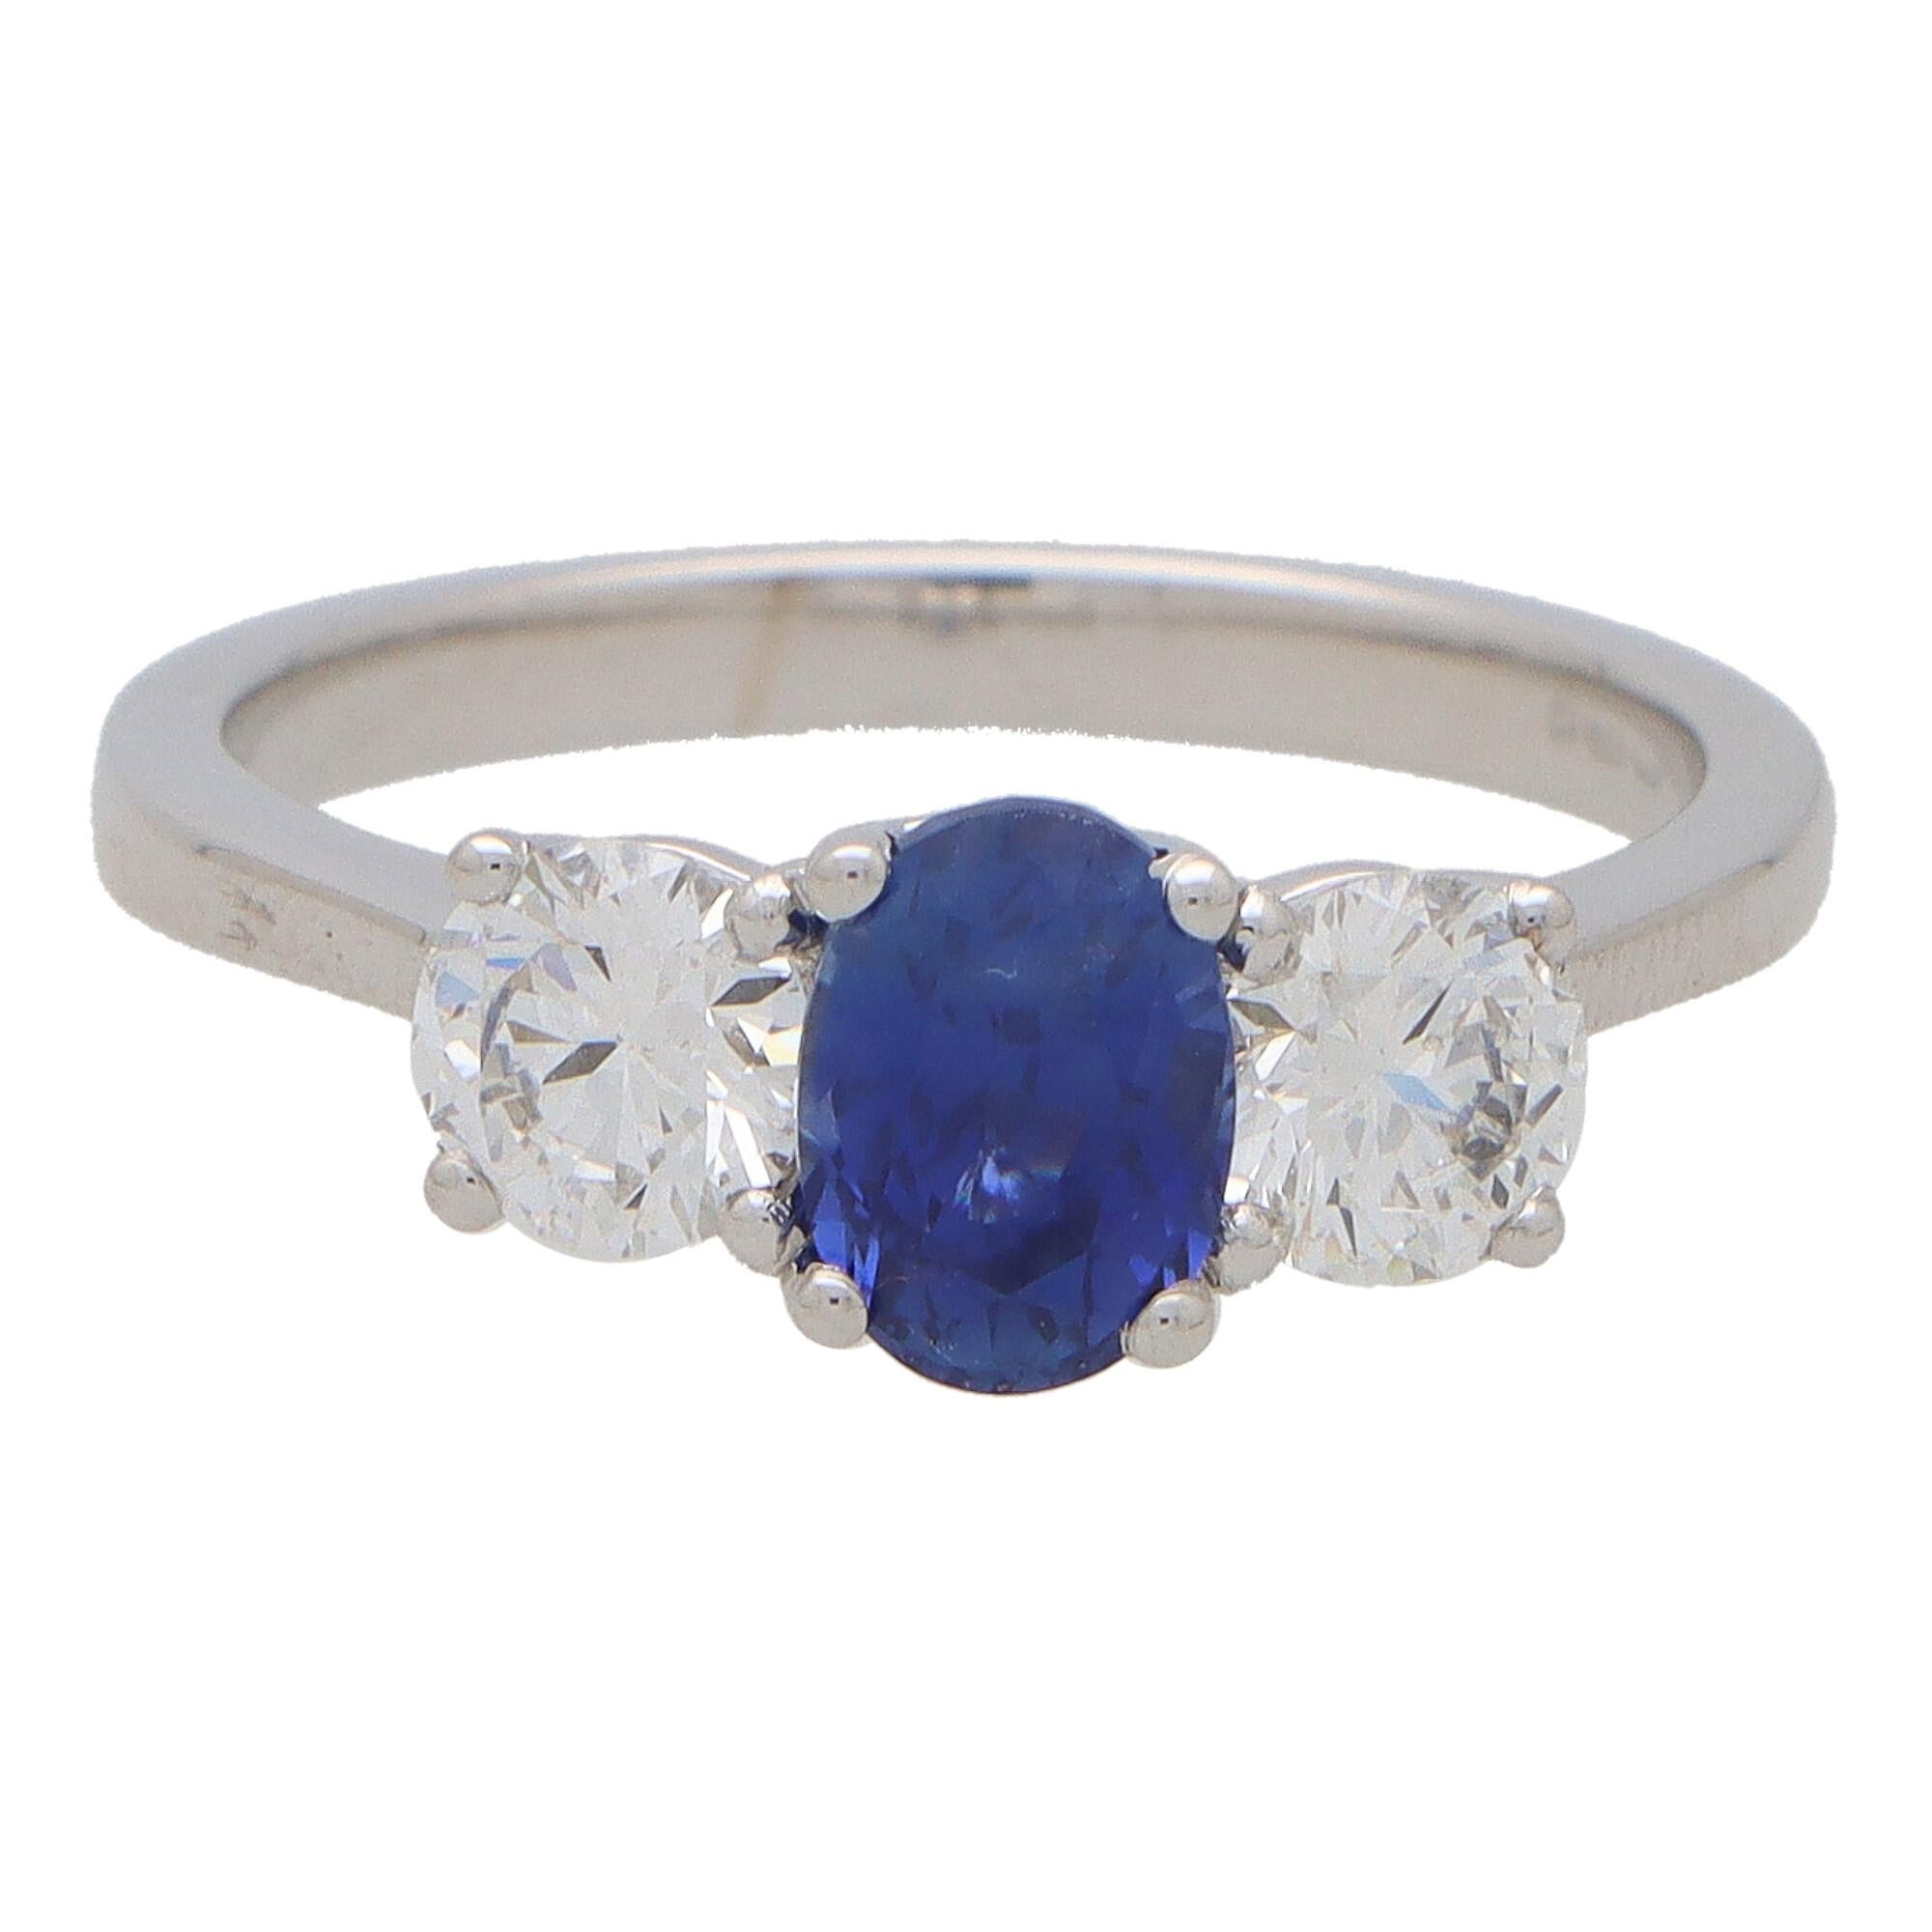  A truly stunning certified sapphire and diamond trilogy ring set in 18k white gold.

This classic three stone ring is centrally set with a 1.29 carat oval blue sapphire which is four claw set in an open back triple setting. The sapphire is then